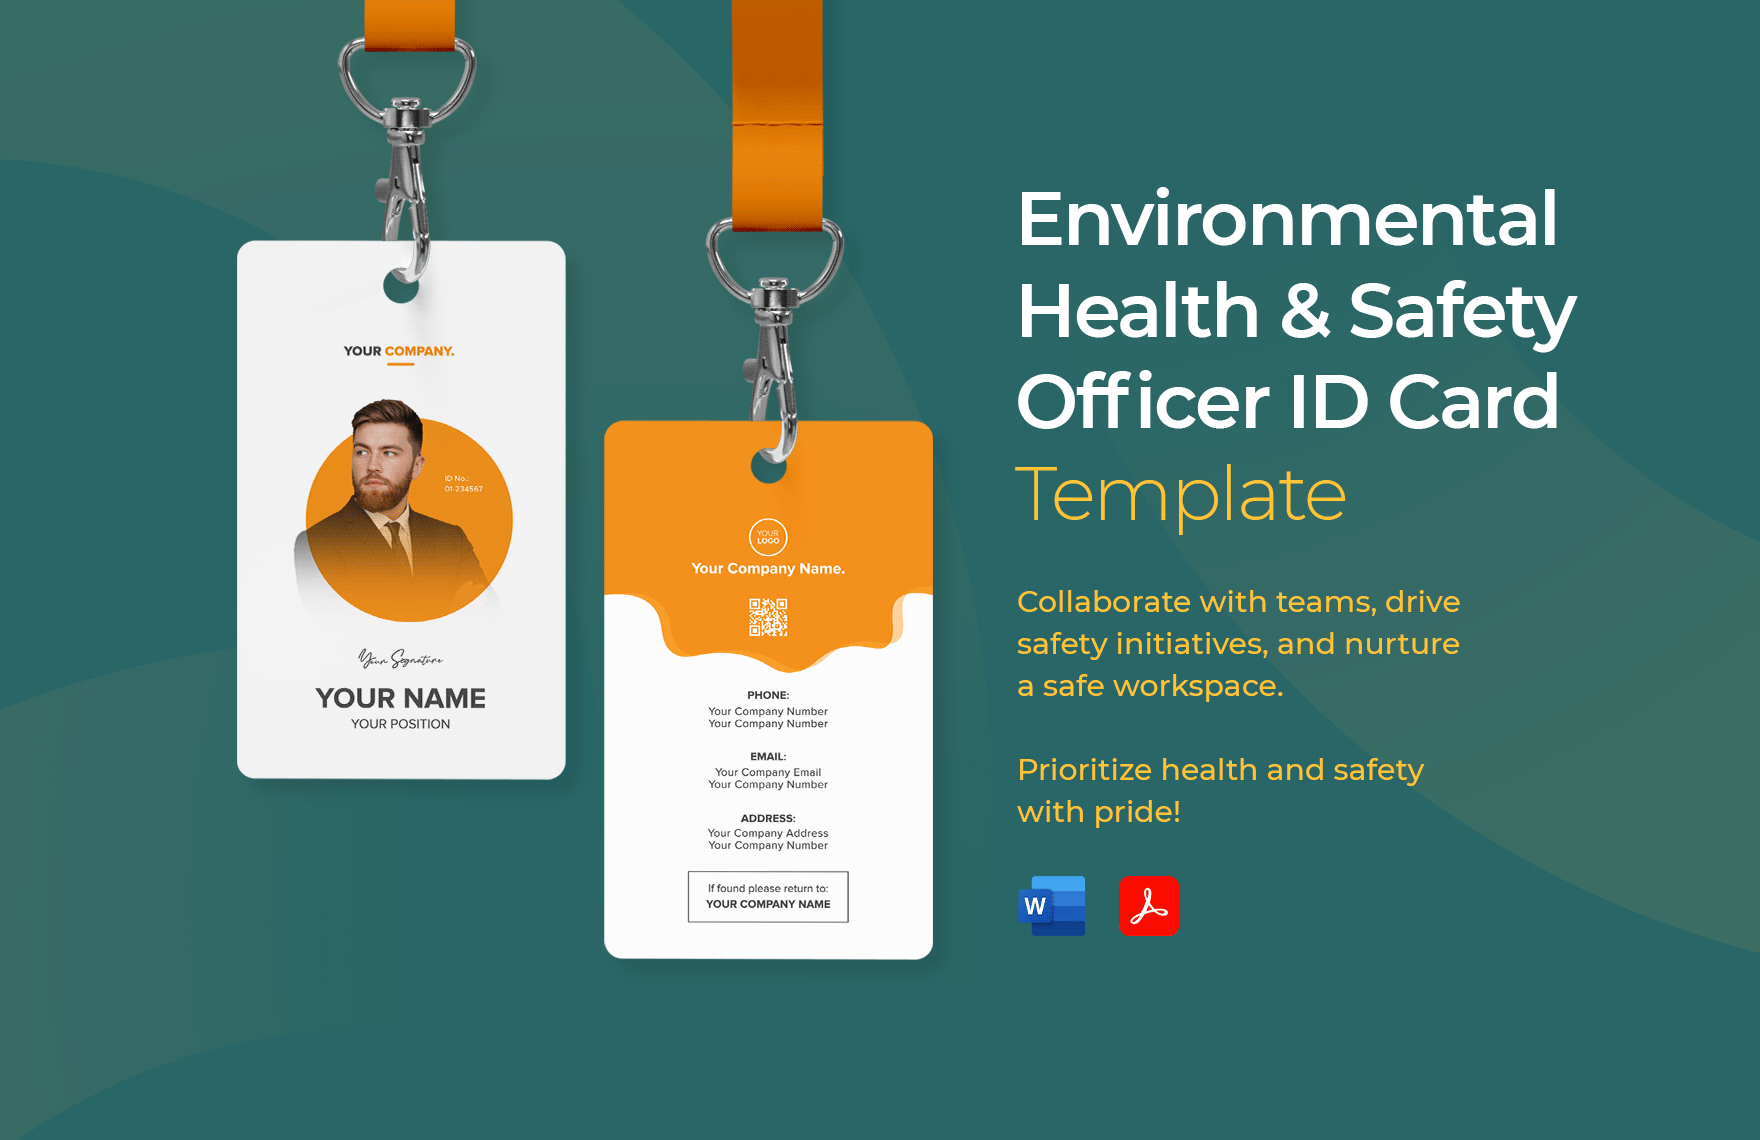 Environmental Health & Safety Officer ID Card Template